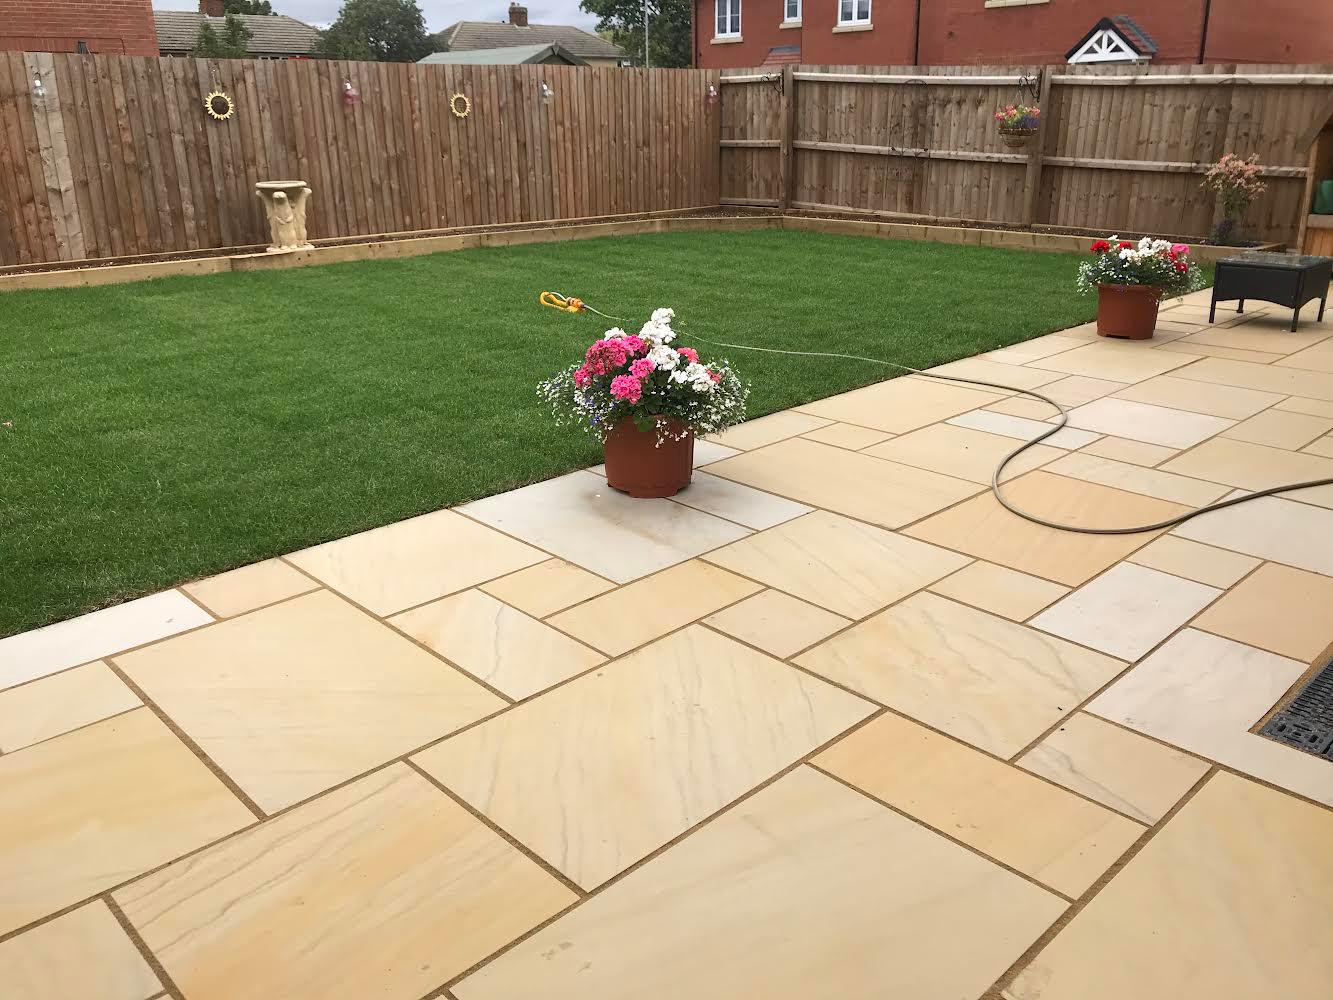 An image showing a newly renovated back garden, includes new real turf and patio.